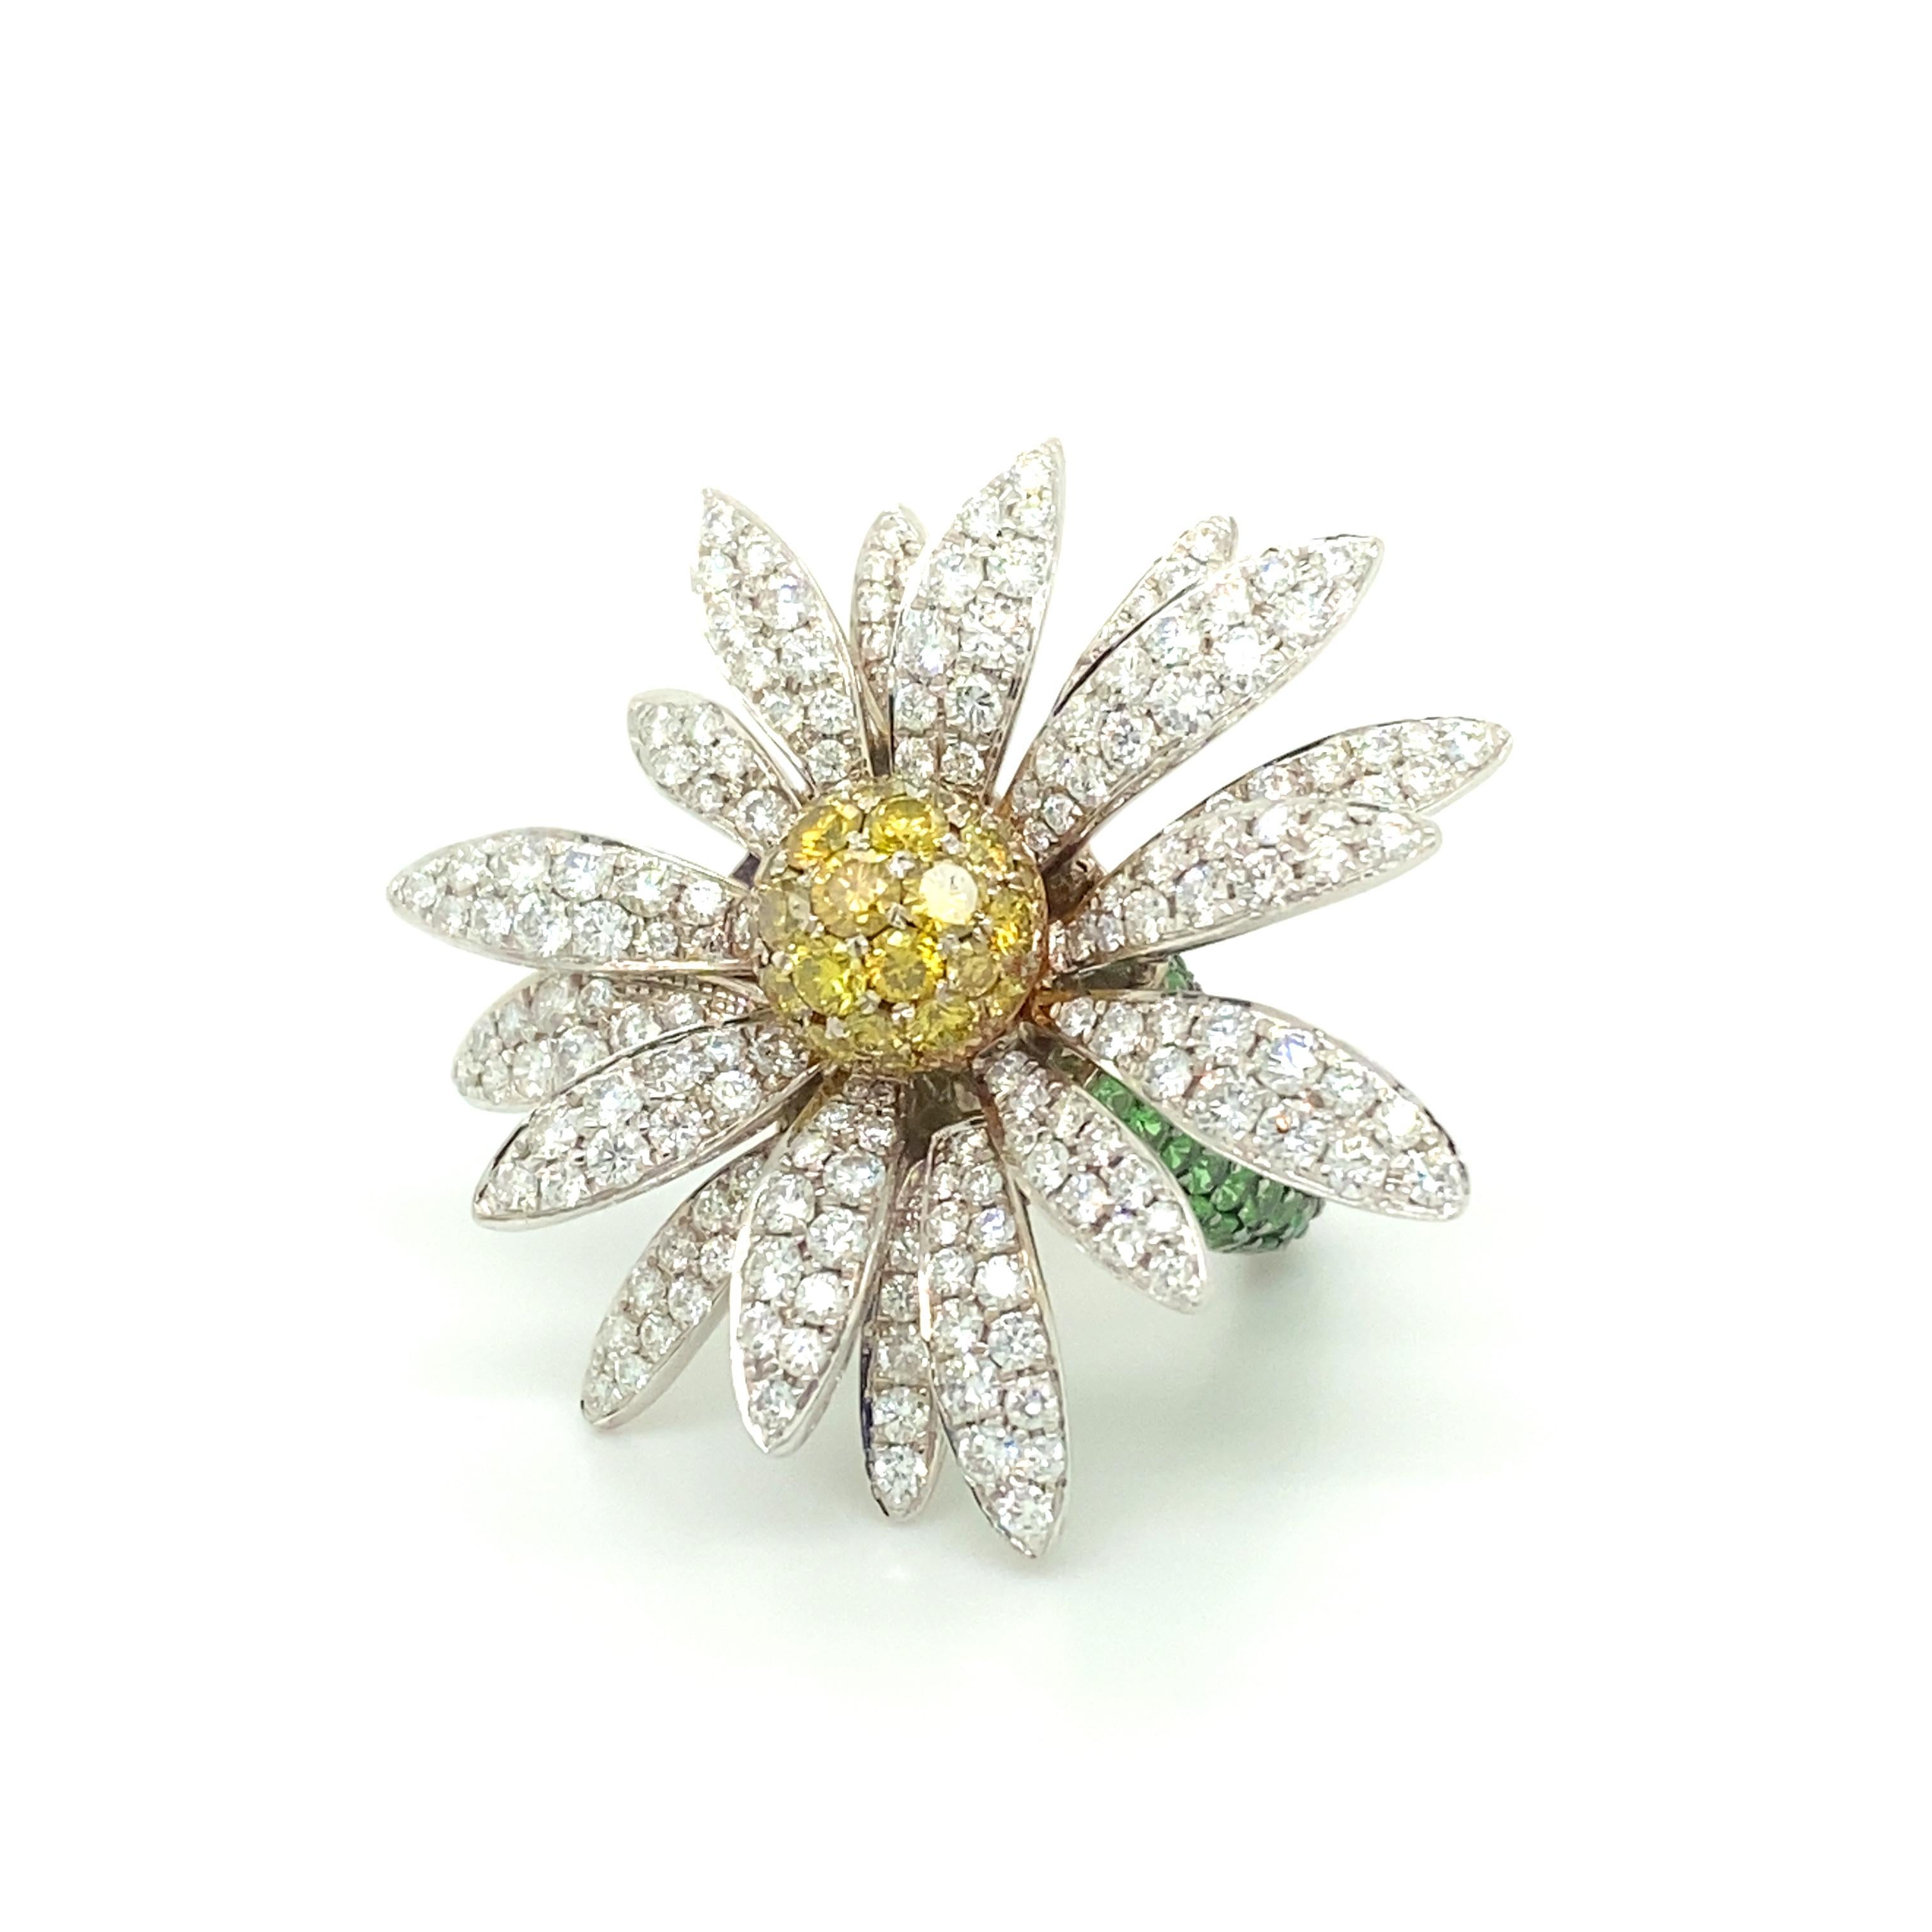 Daisy Ring with Diamonds and Tsavorites in 18 Karat White Gold by SILLAM 1835 2